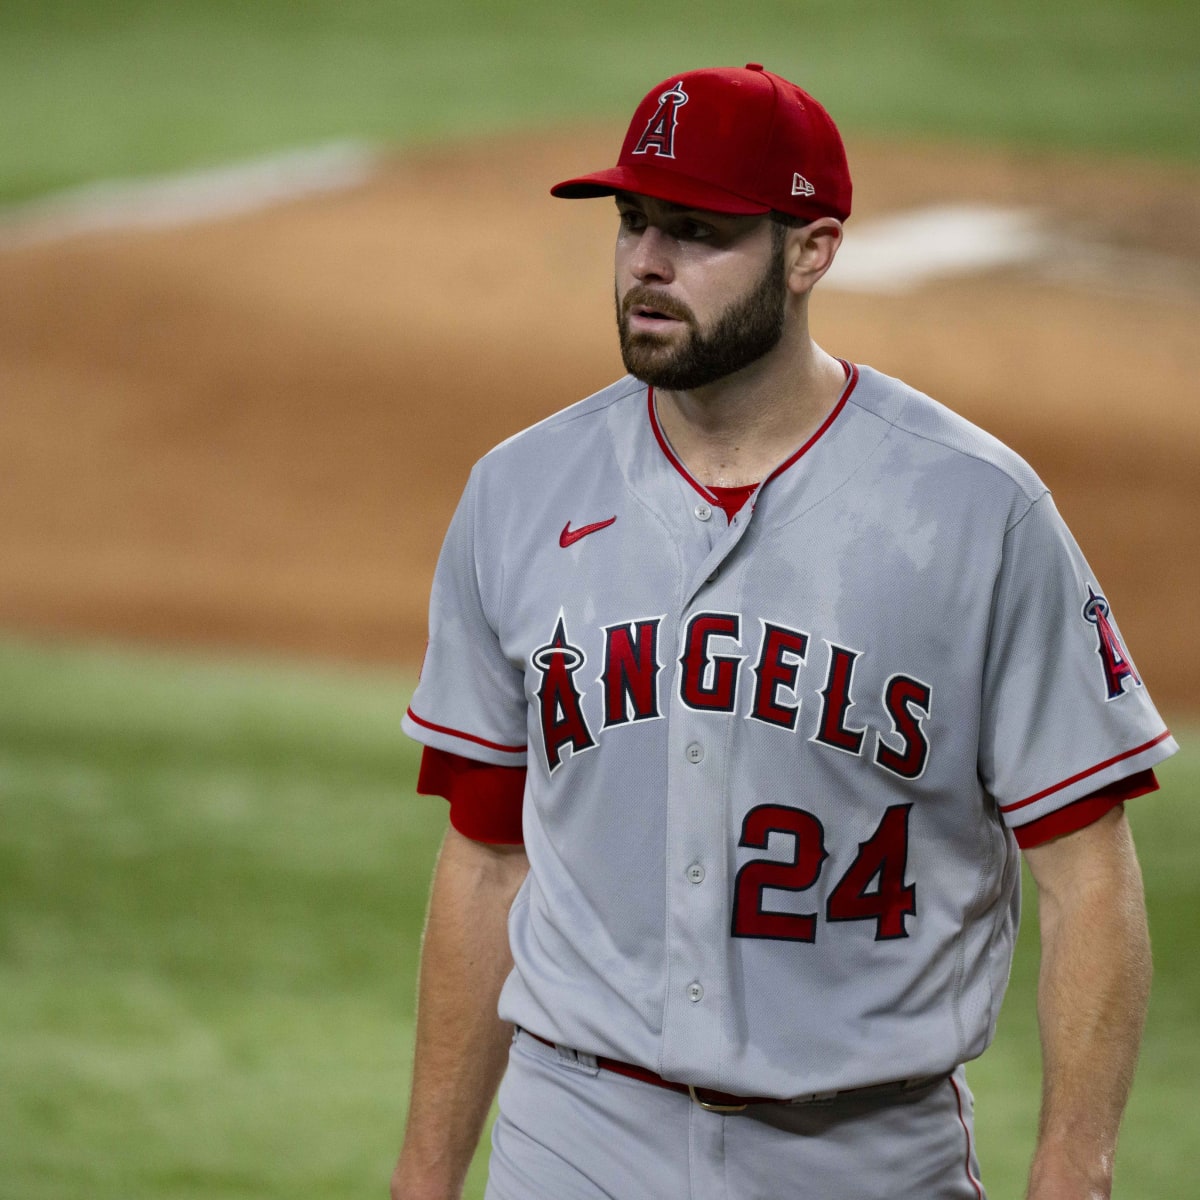 Braves Light Up Lucas Giolito In 2nd Rough Start For Angels